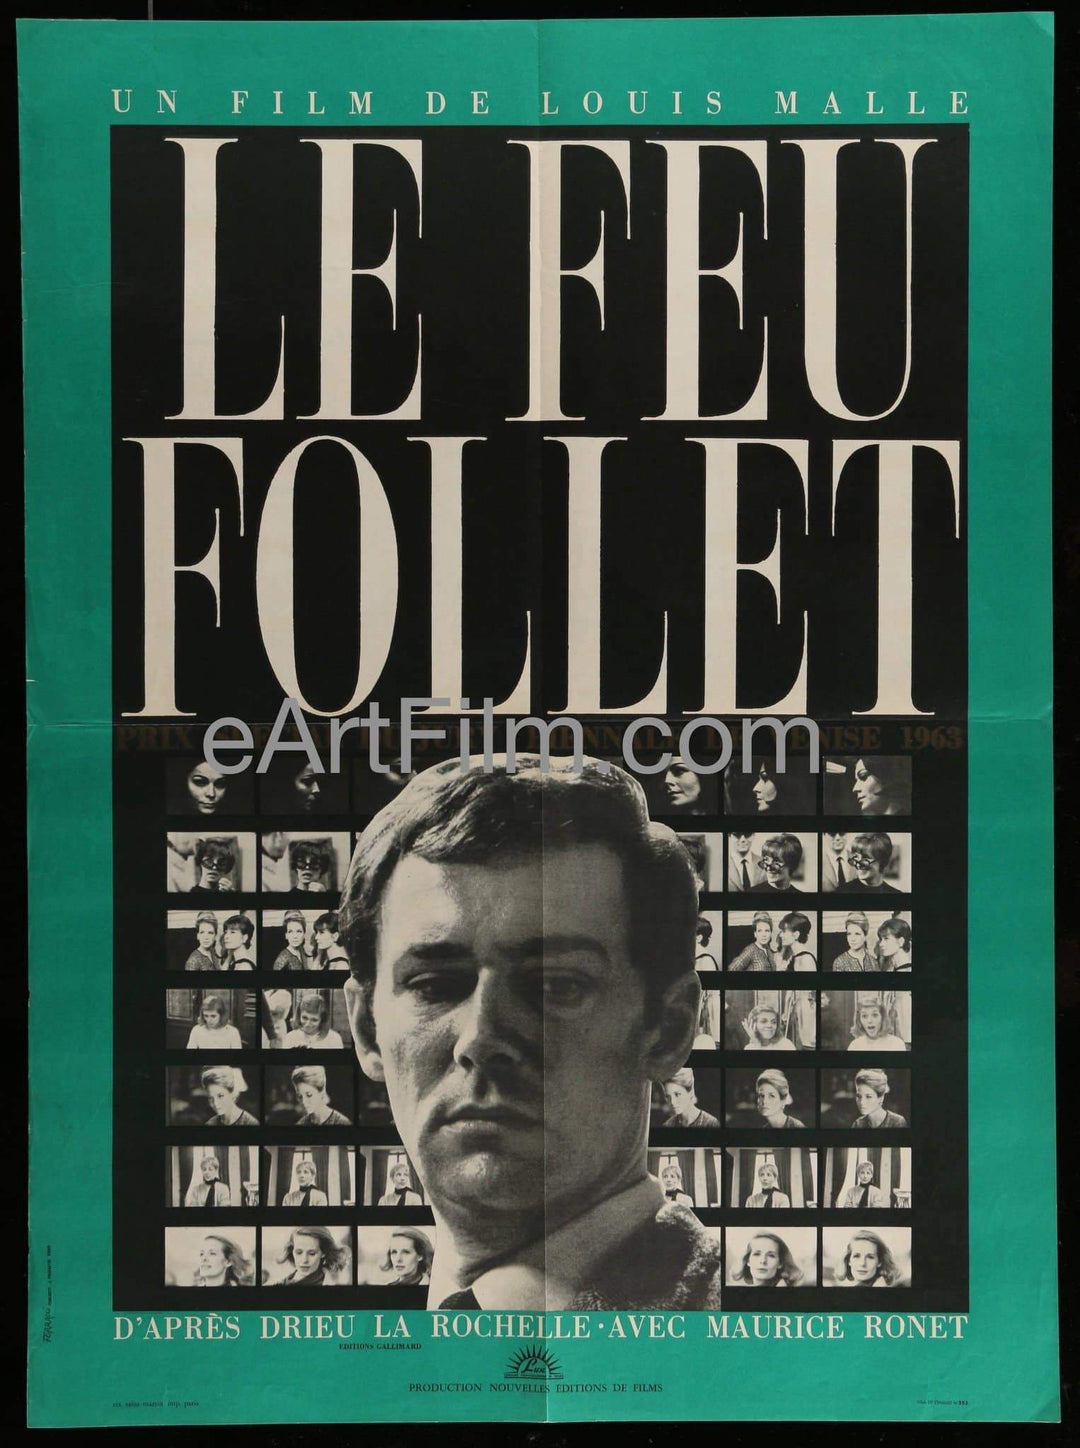 eArtFilm.com French Affiche poster (22"x31") Fire Within 1963 22x31 French Affiche Poster Louis Malle-Maurice Ronet